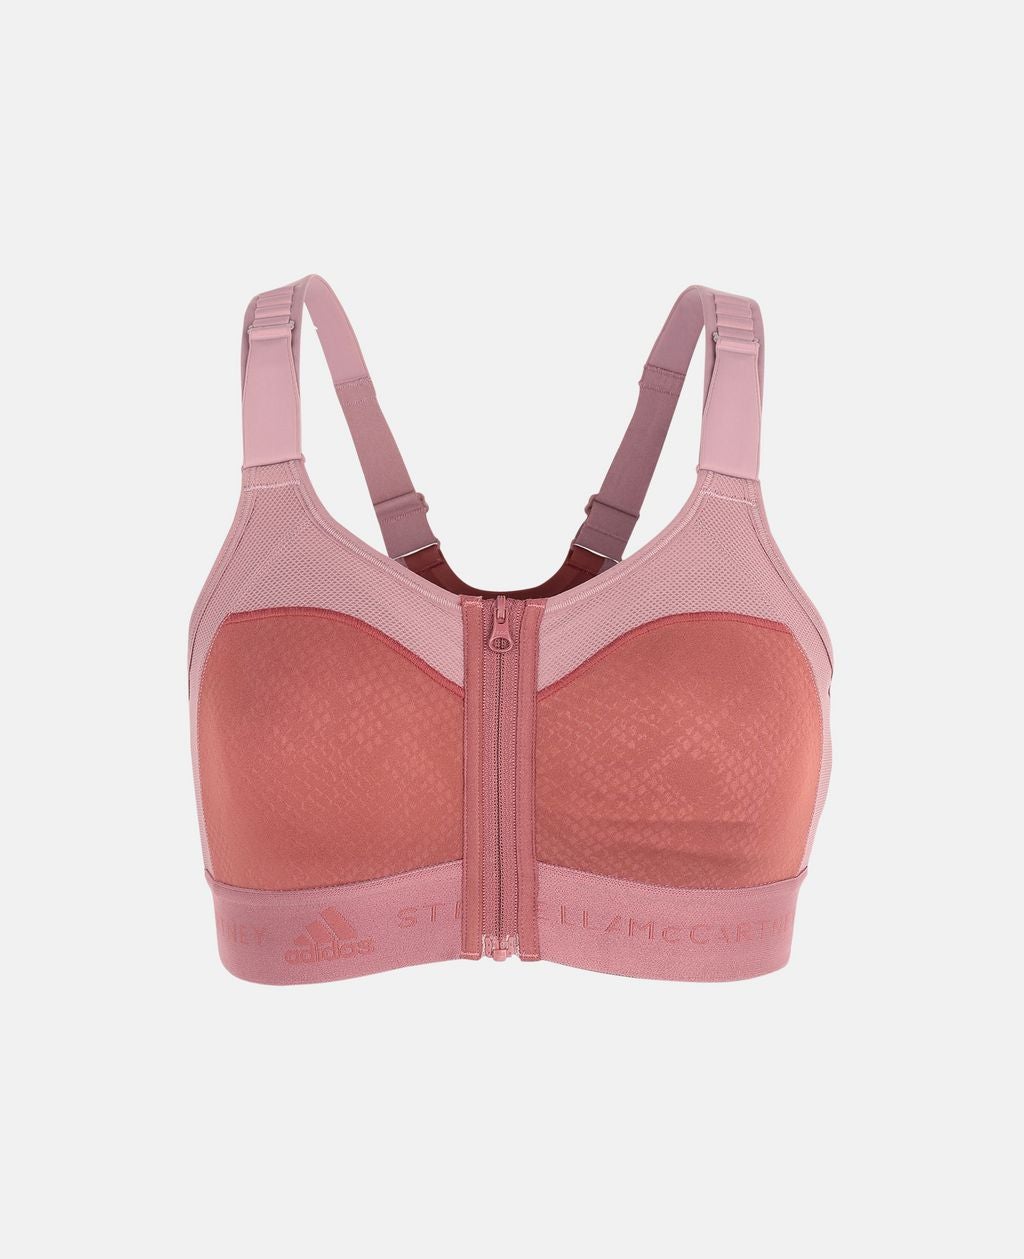 Sports Bras for Mastectomy Patients